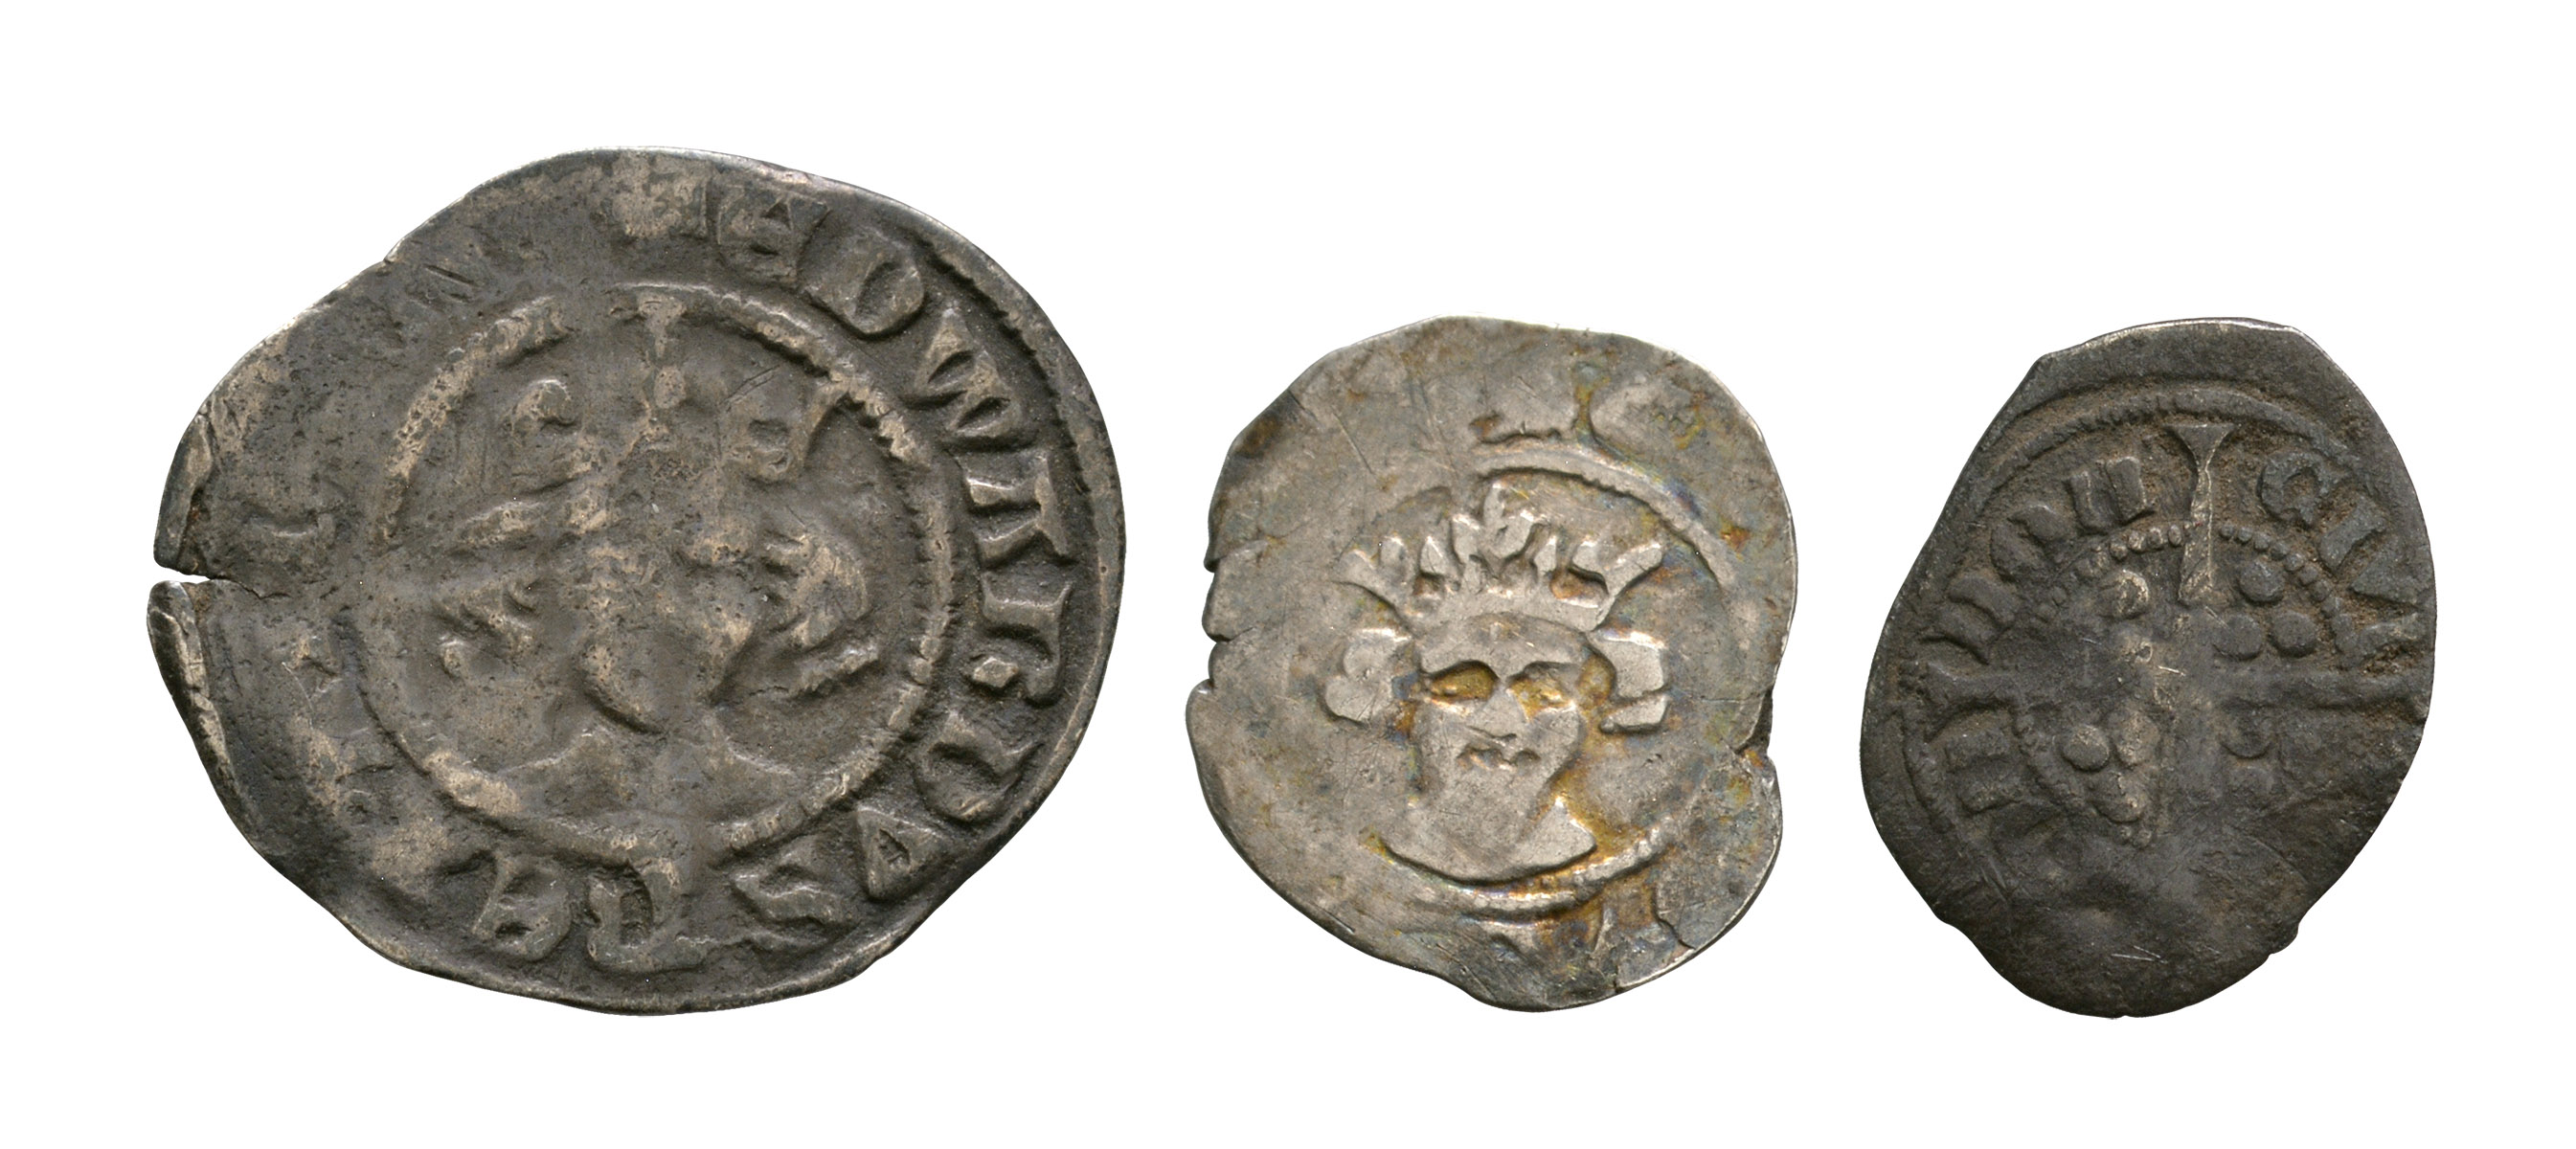 English Medieval Coins - Edward I and Later - Long Cross Penny, Halfpenny and Farthing